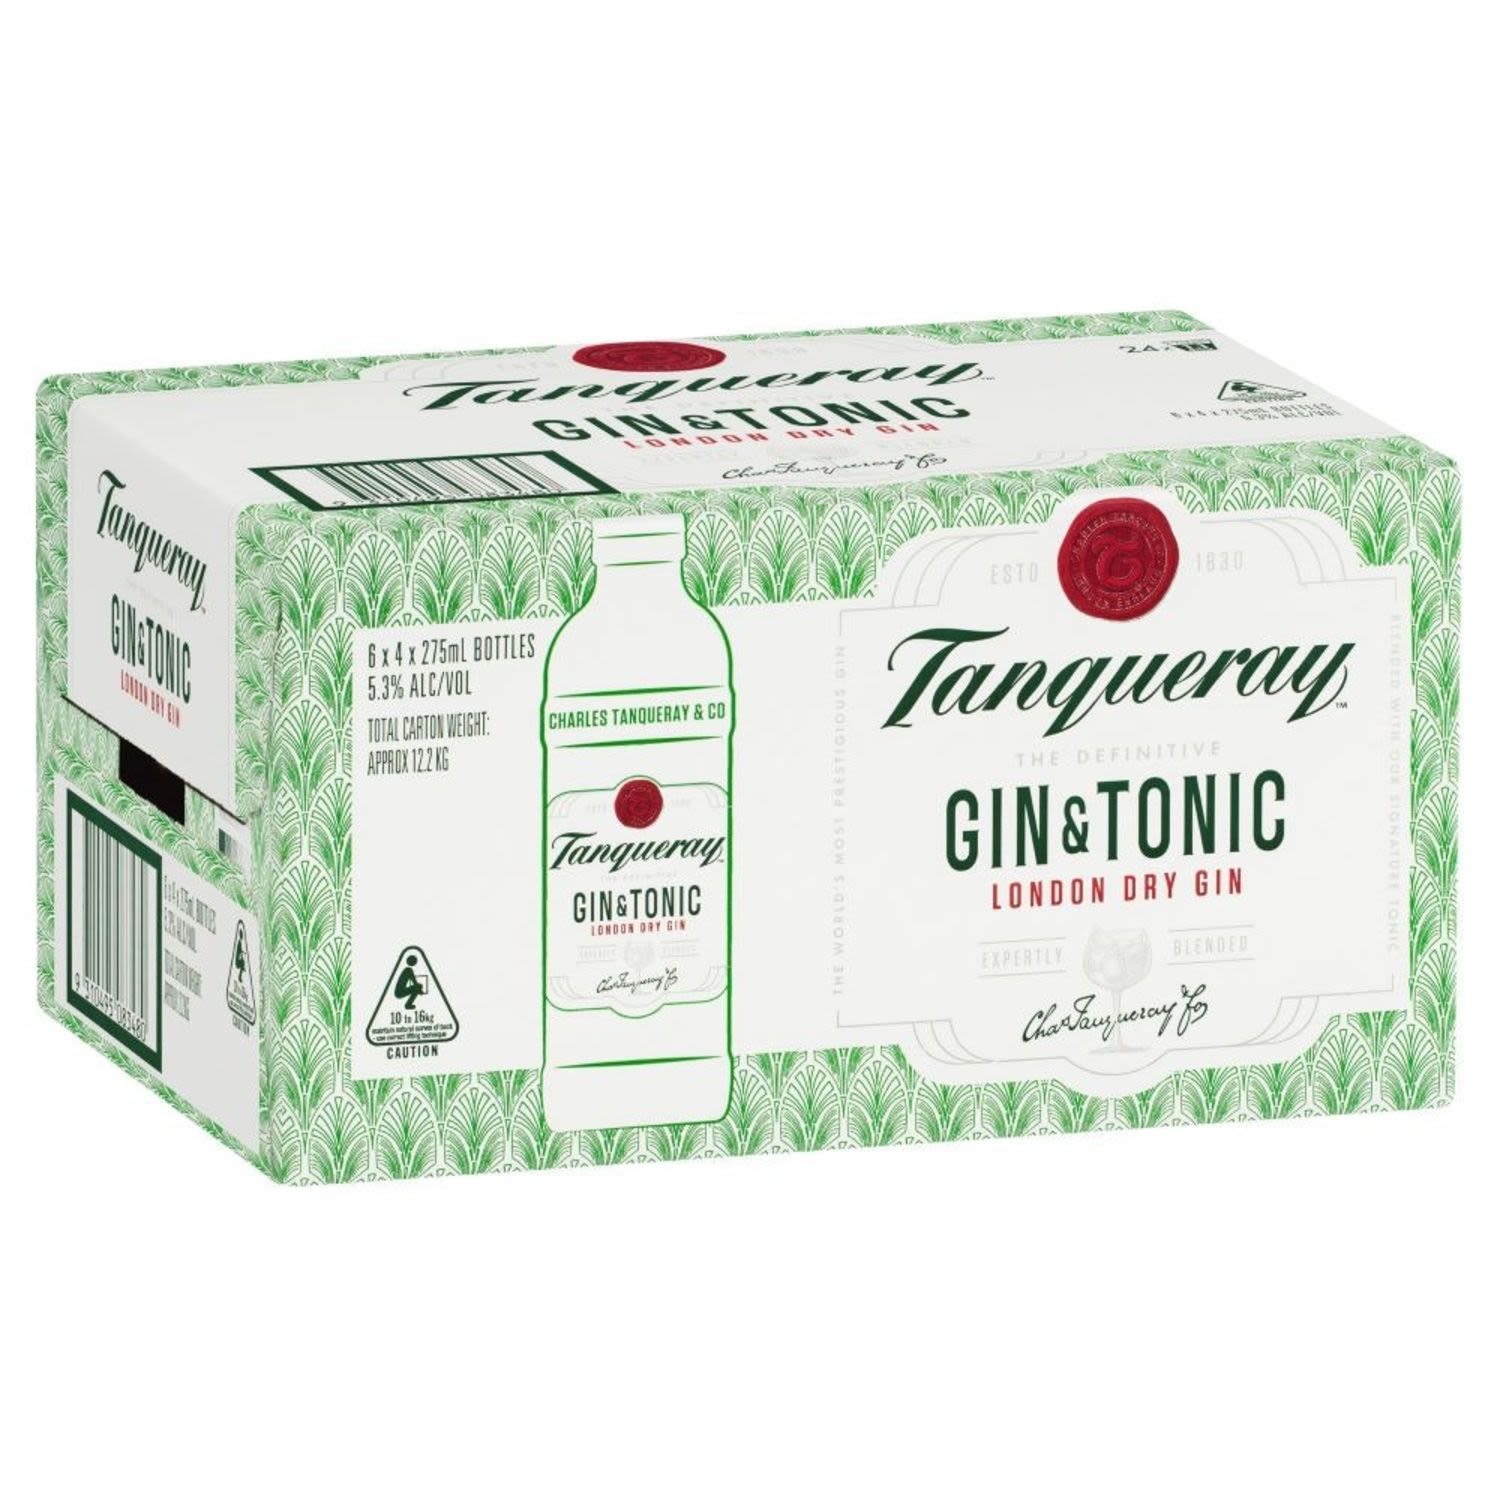 Tanqueray Gin & Tonic Bottle 275mL 24 Pack